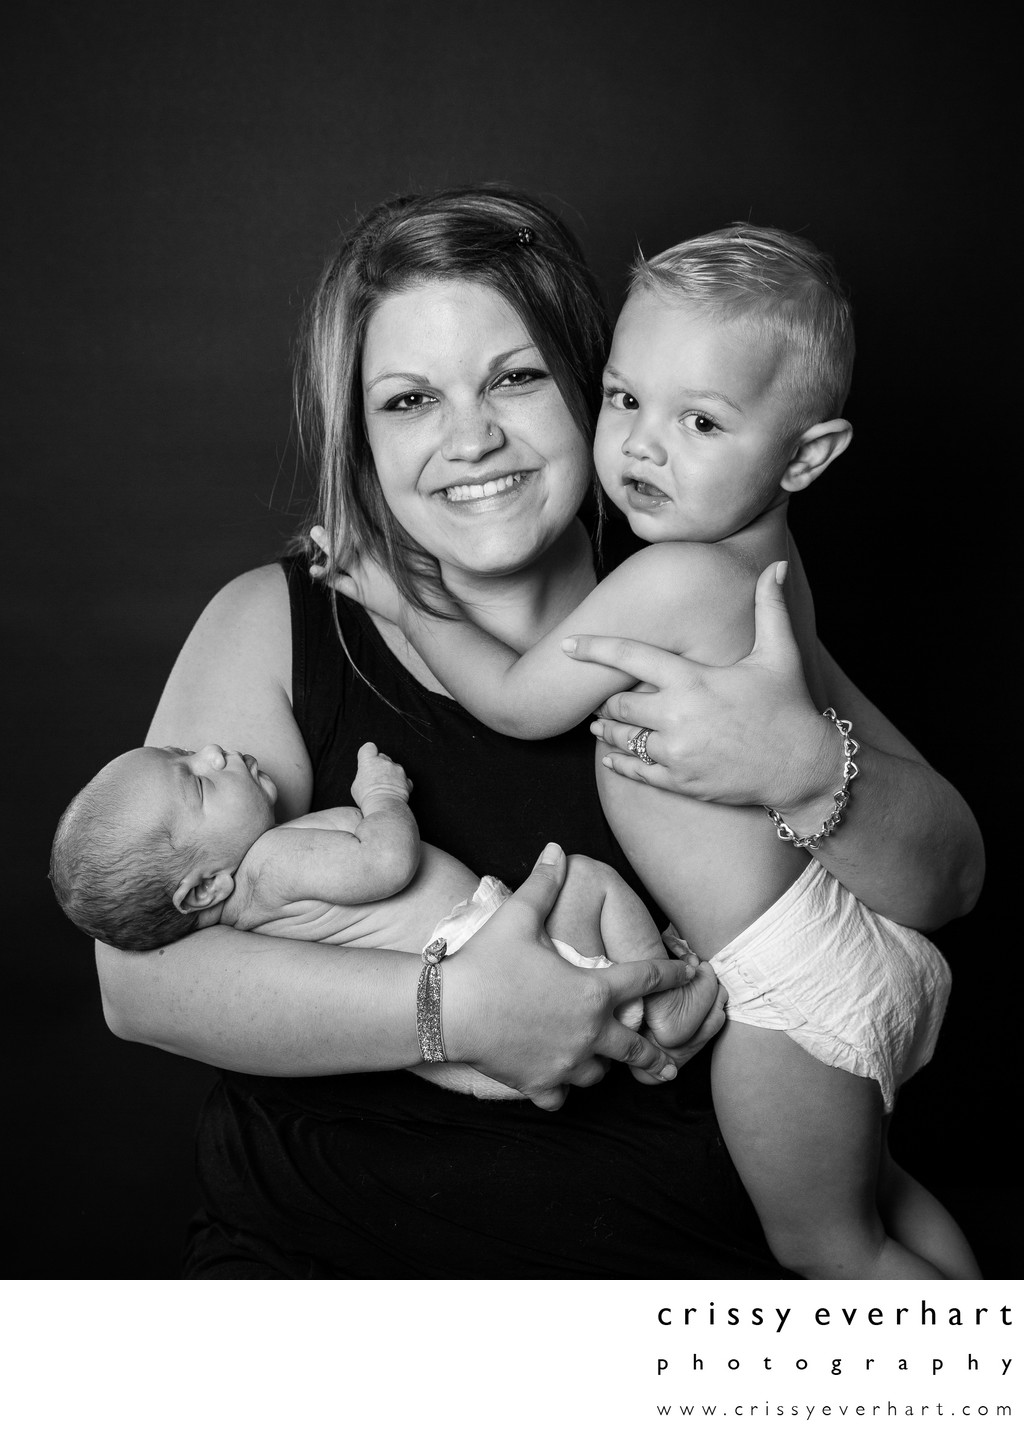 Portraits of Mom and Children - Black and White Photos